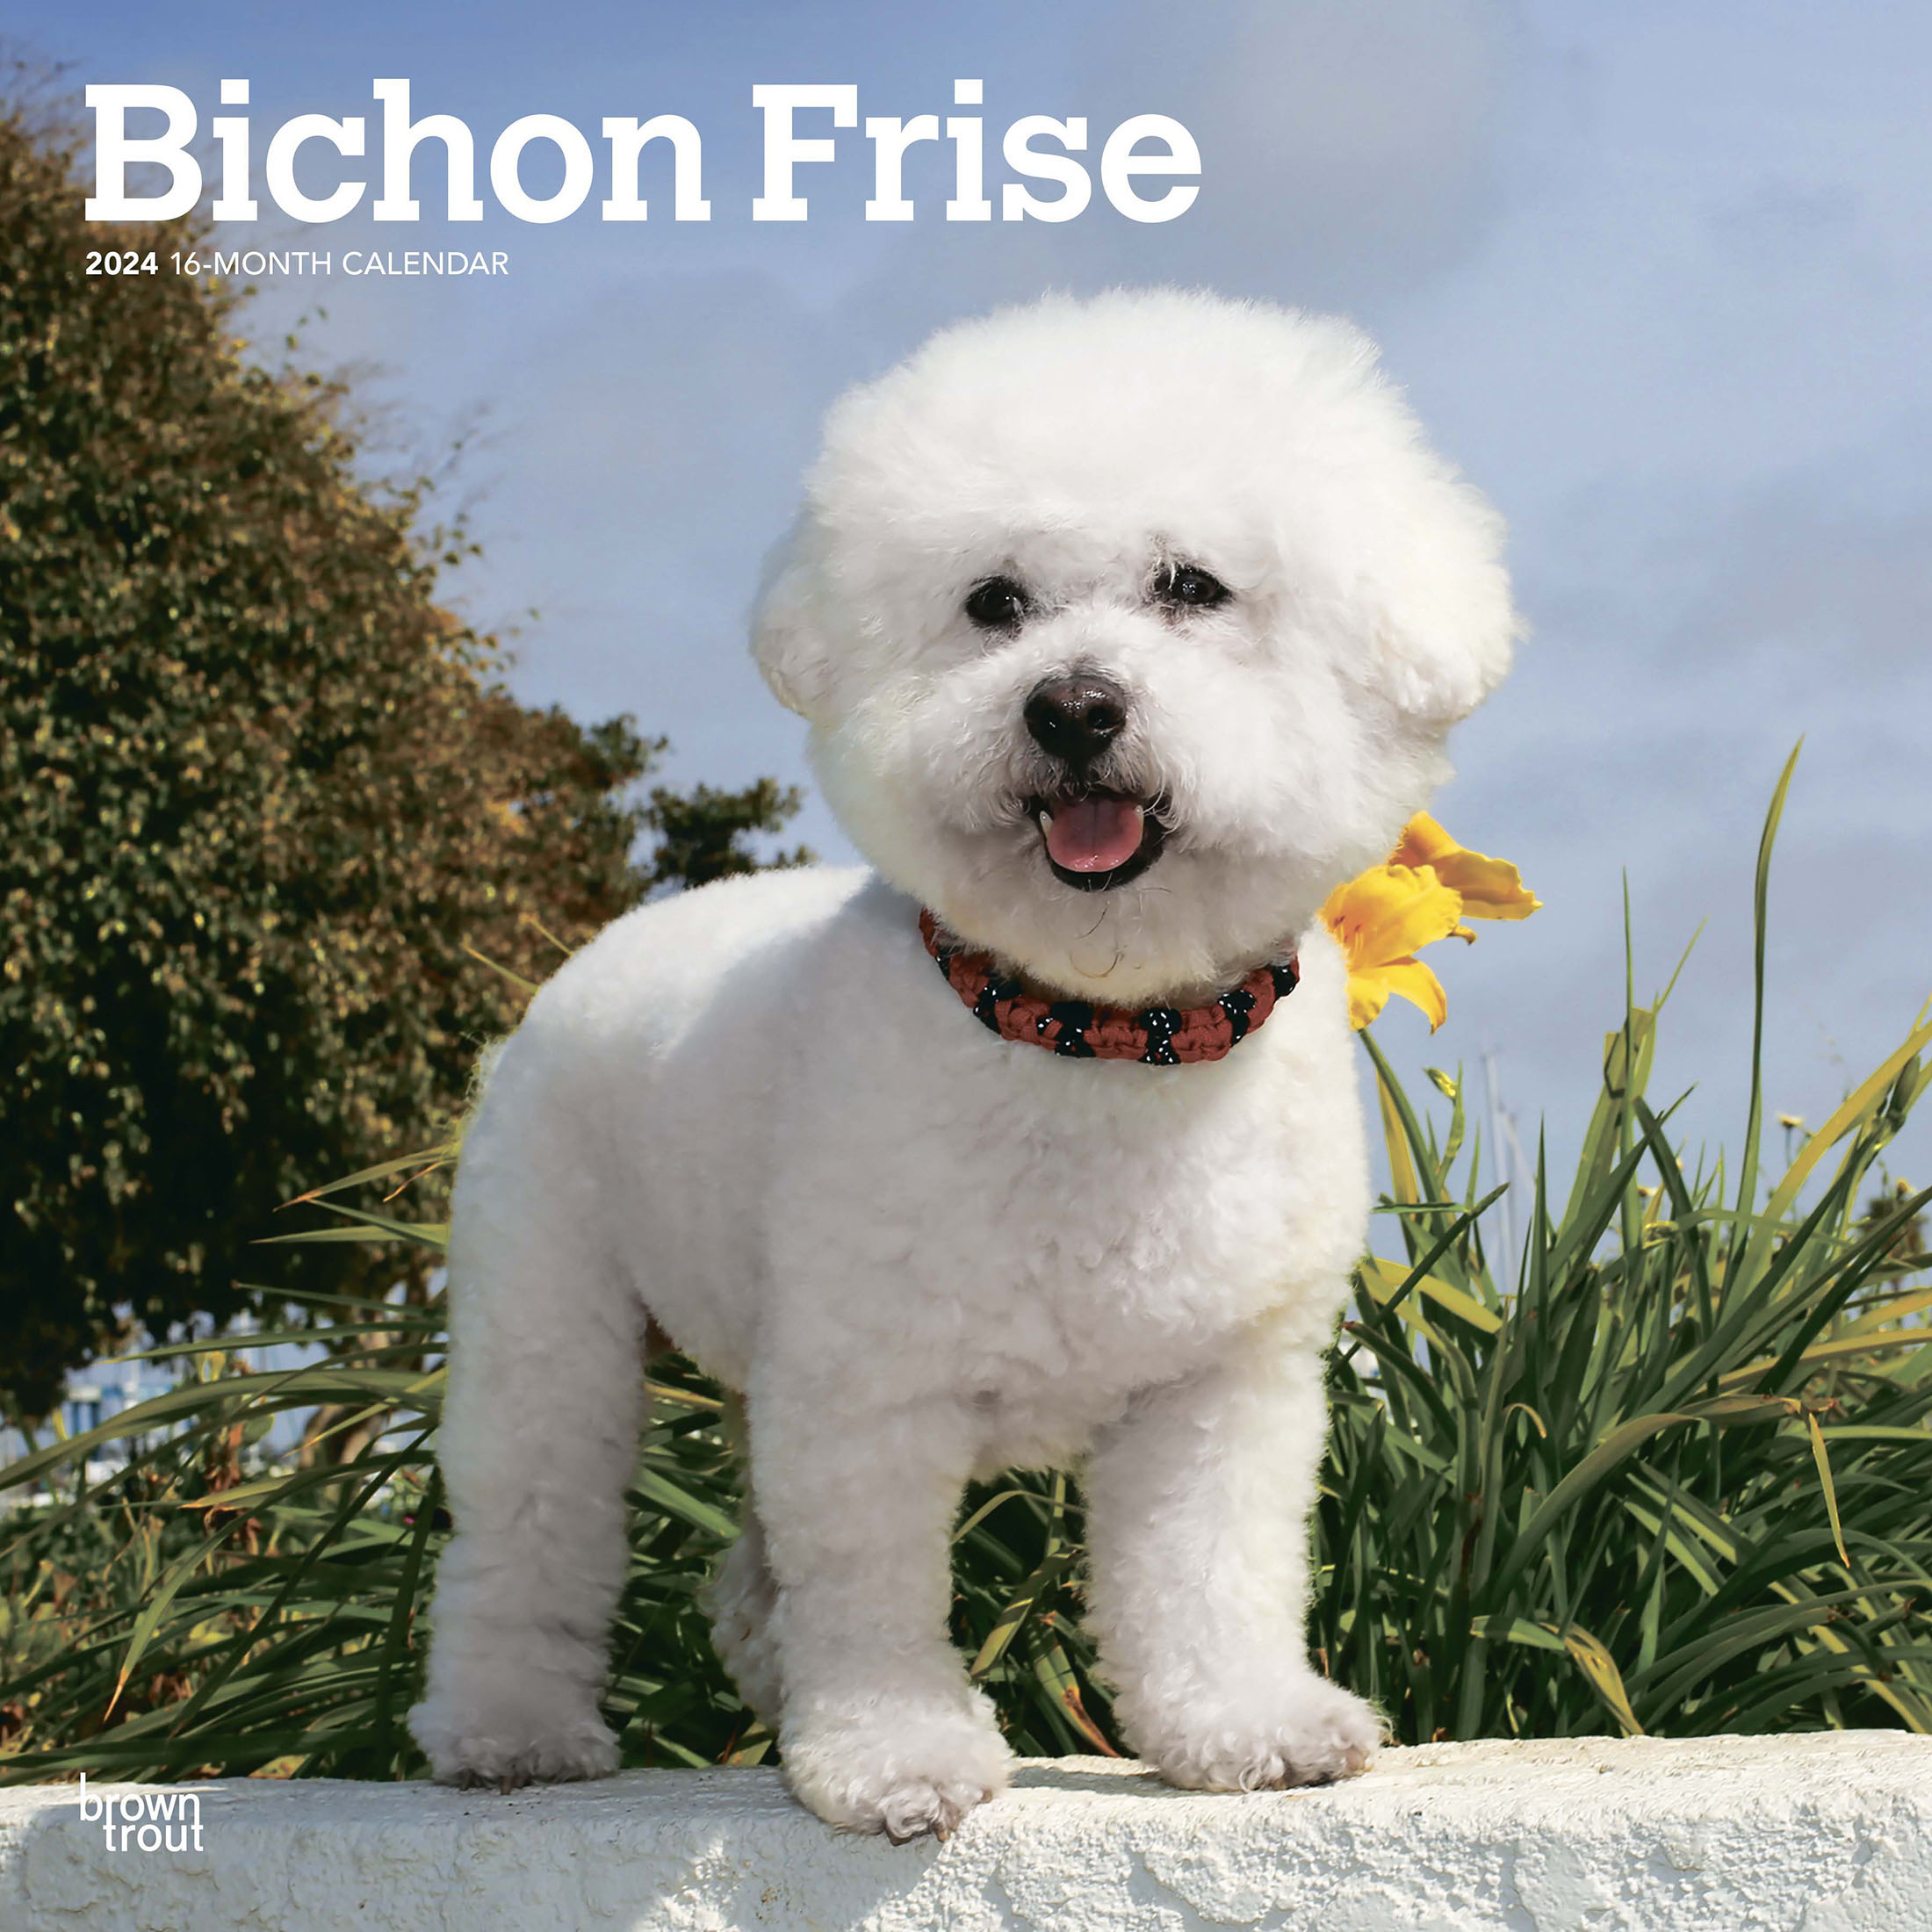 Bichon Frise | 2024 12x24" (Hanging) Square Wall Calendar | BrownTrout - image 1 of 8